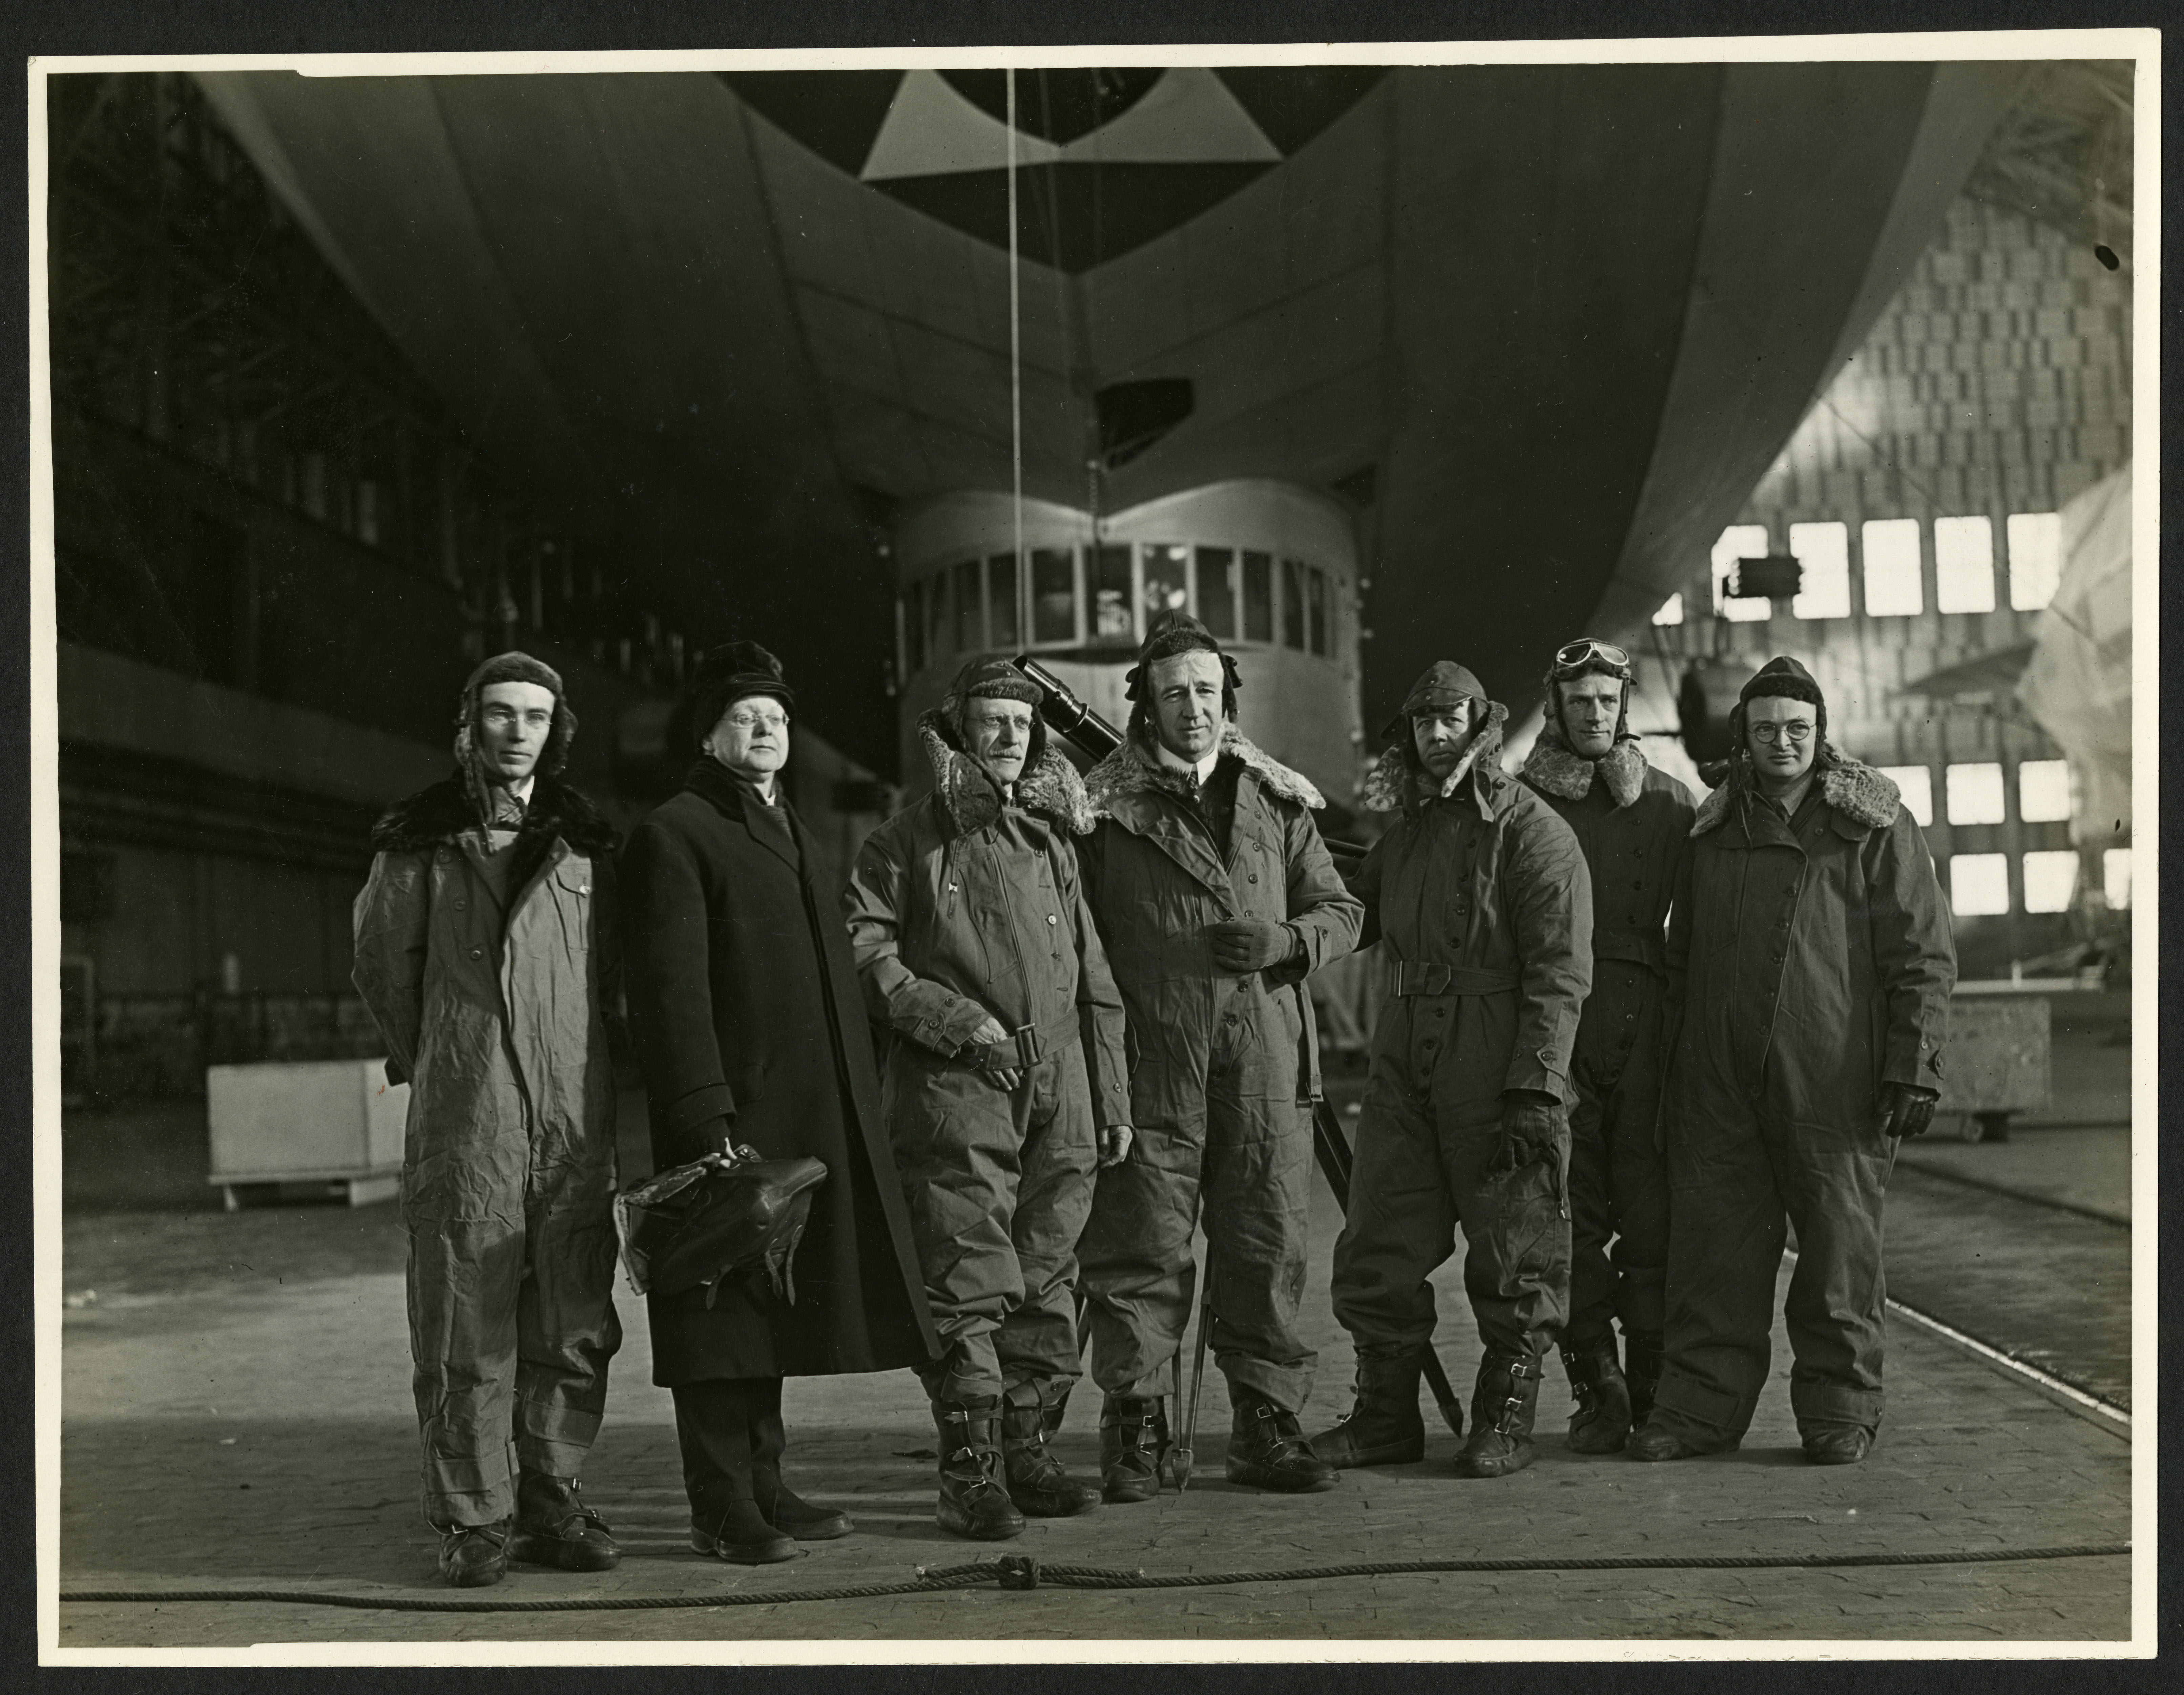 Crew and scientists for the solar eclipse expedition onboard the dirigible U.S.S. Los Angeles.